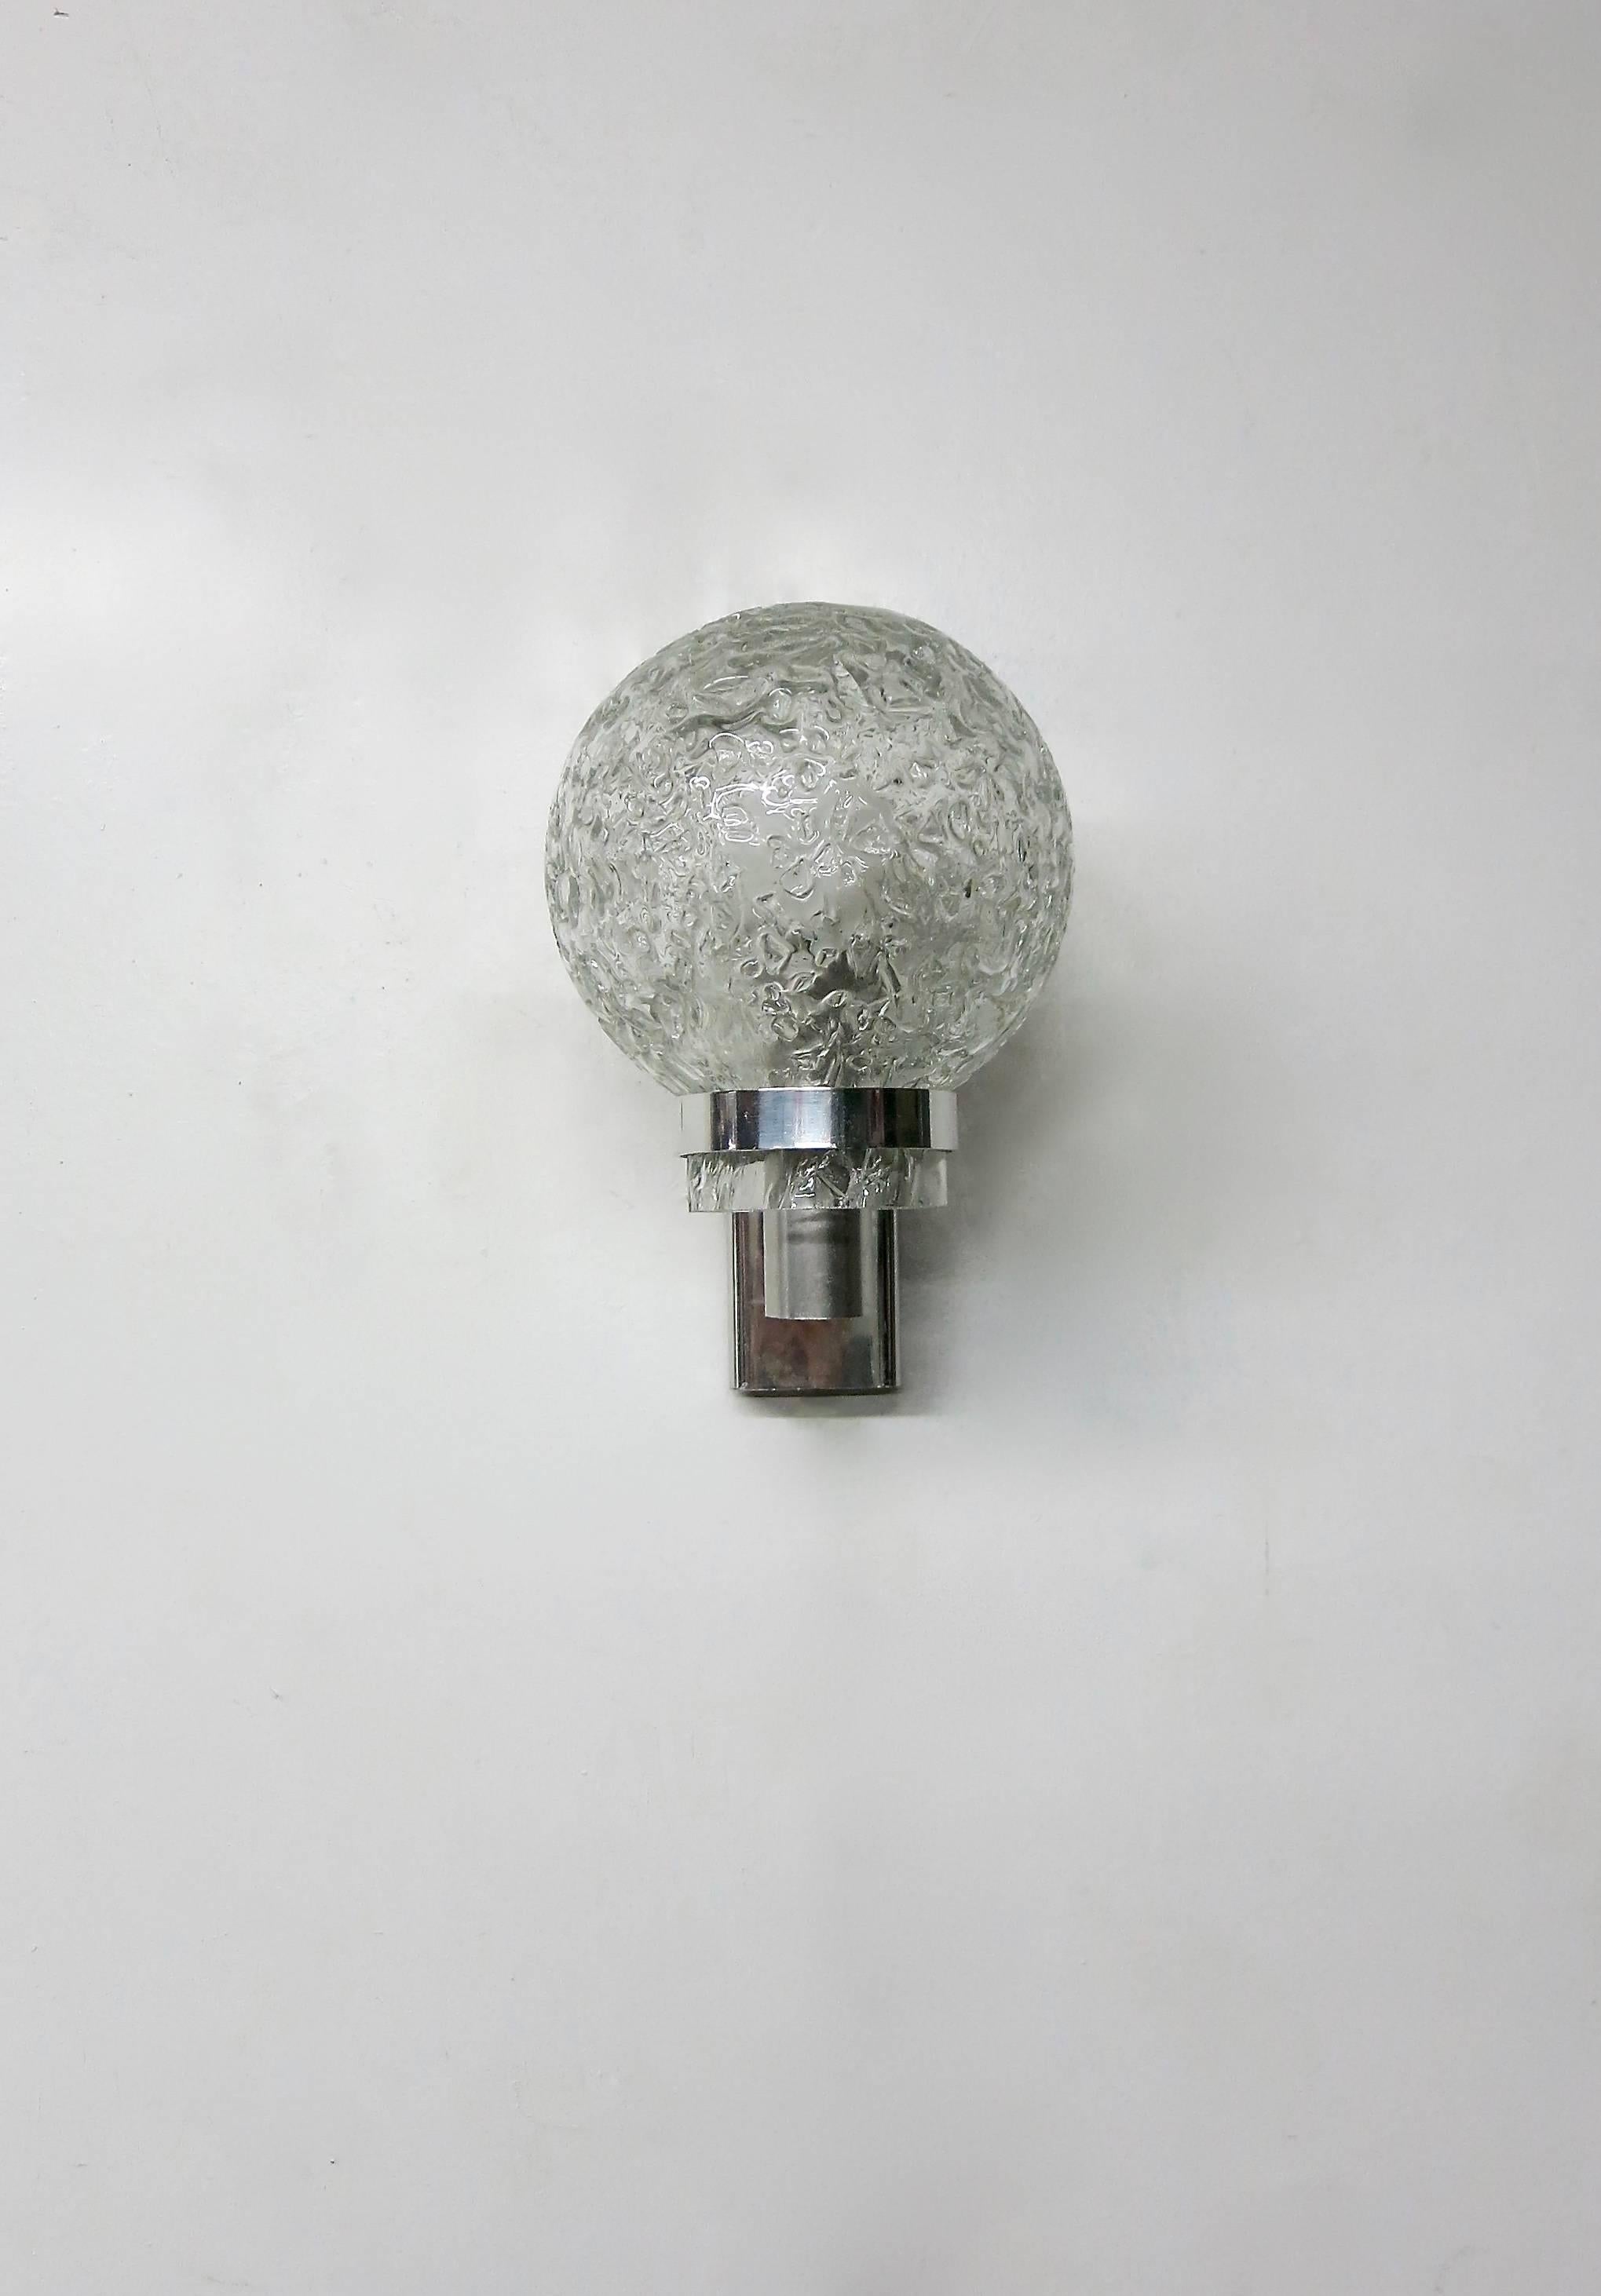 Italian mid-century modern chrome sconces. Each sconce has a single arm supporting a round textured glass shade covering a single socket. The wiring has been changed to an American candelabra socket if desired, the sconces can be changed to an